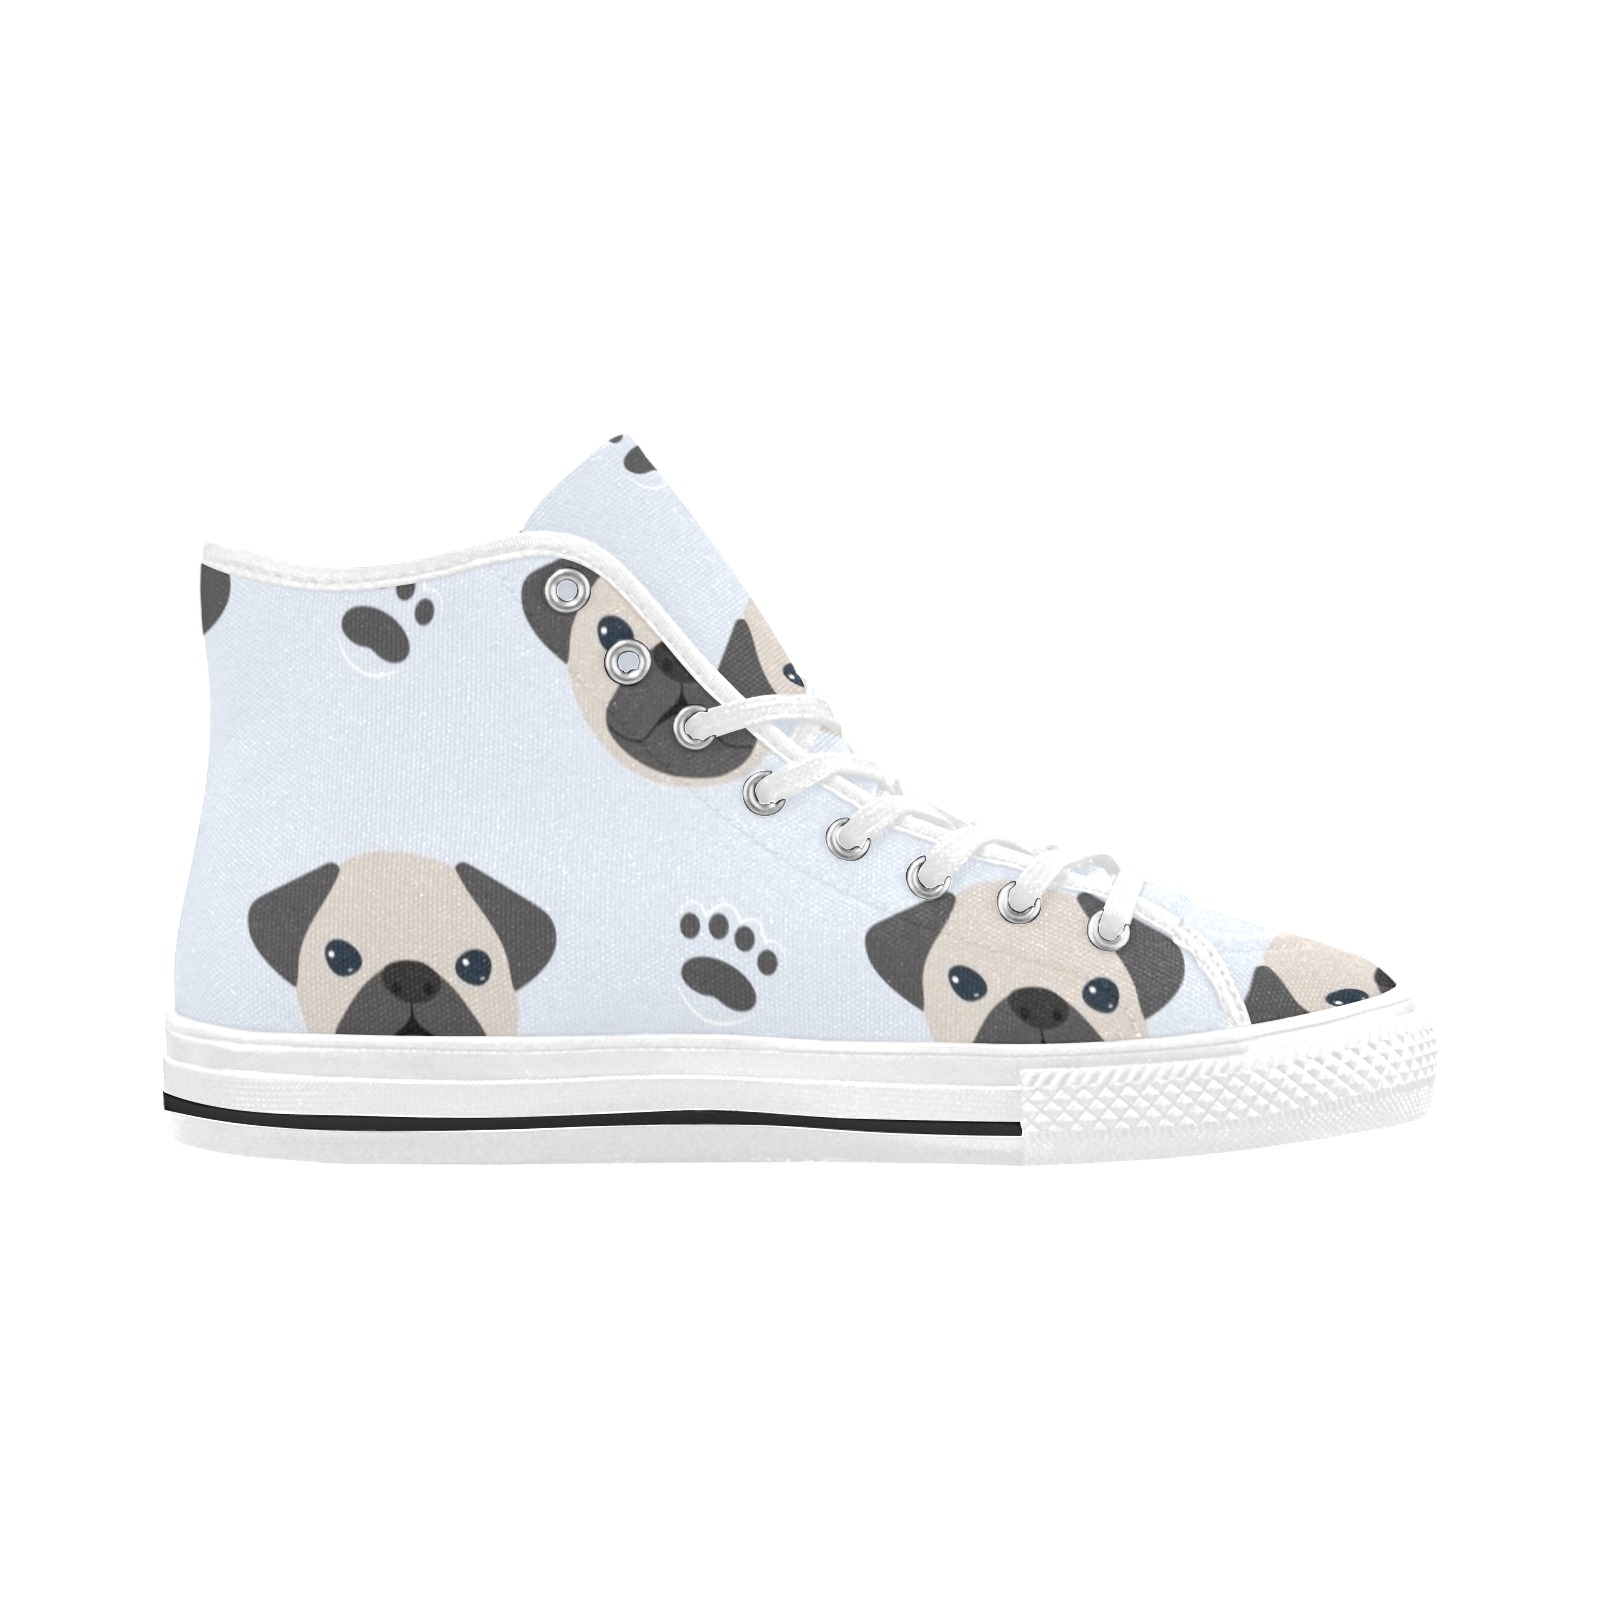 Pugs and Paws Vancouver H Women's Canvas Shoes (1013-1)